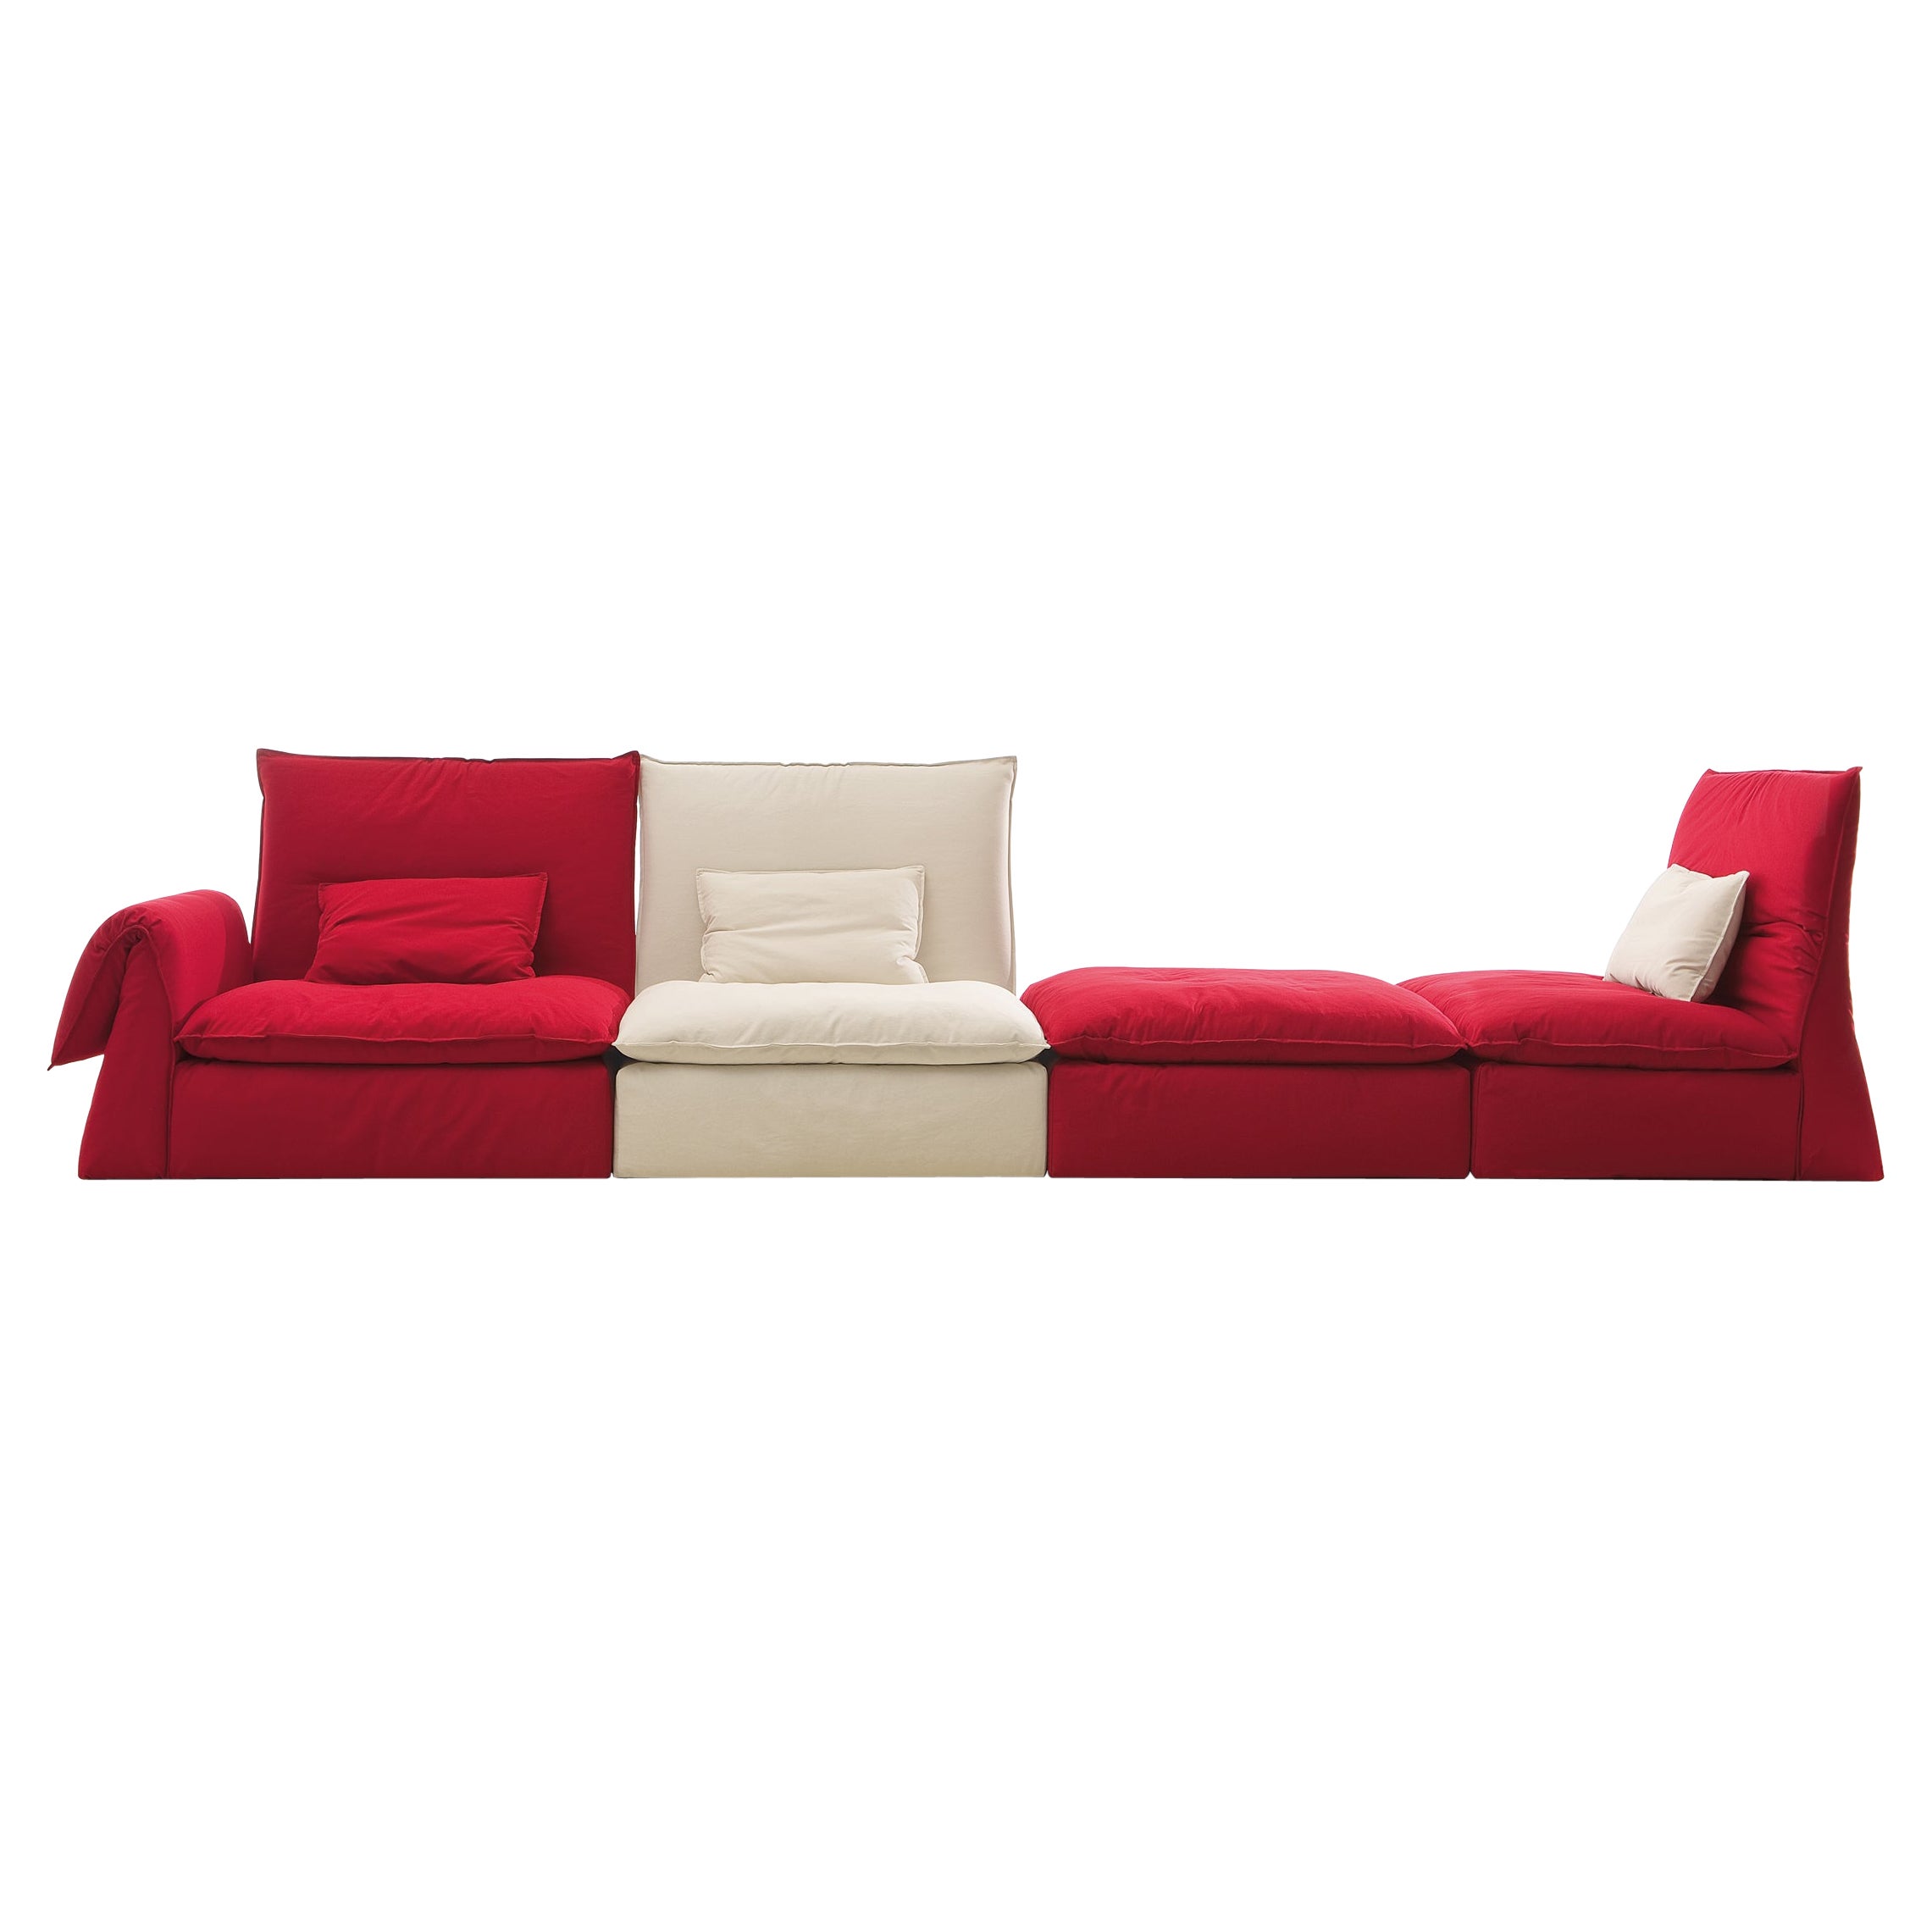 Les Femmes Small Sofa in Lario Red & White Upholstery by Giuseppe Viganò